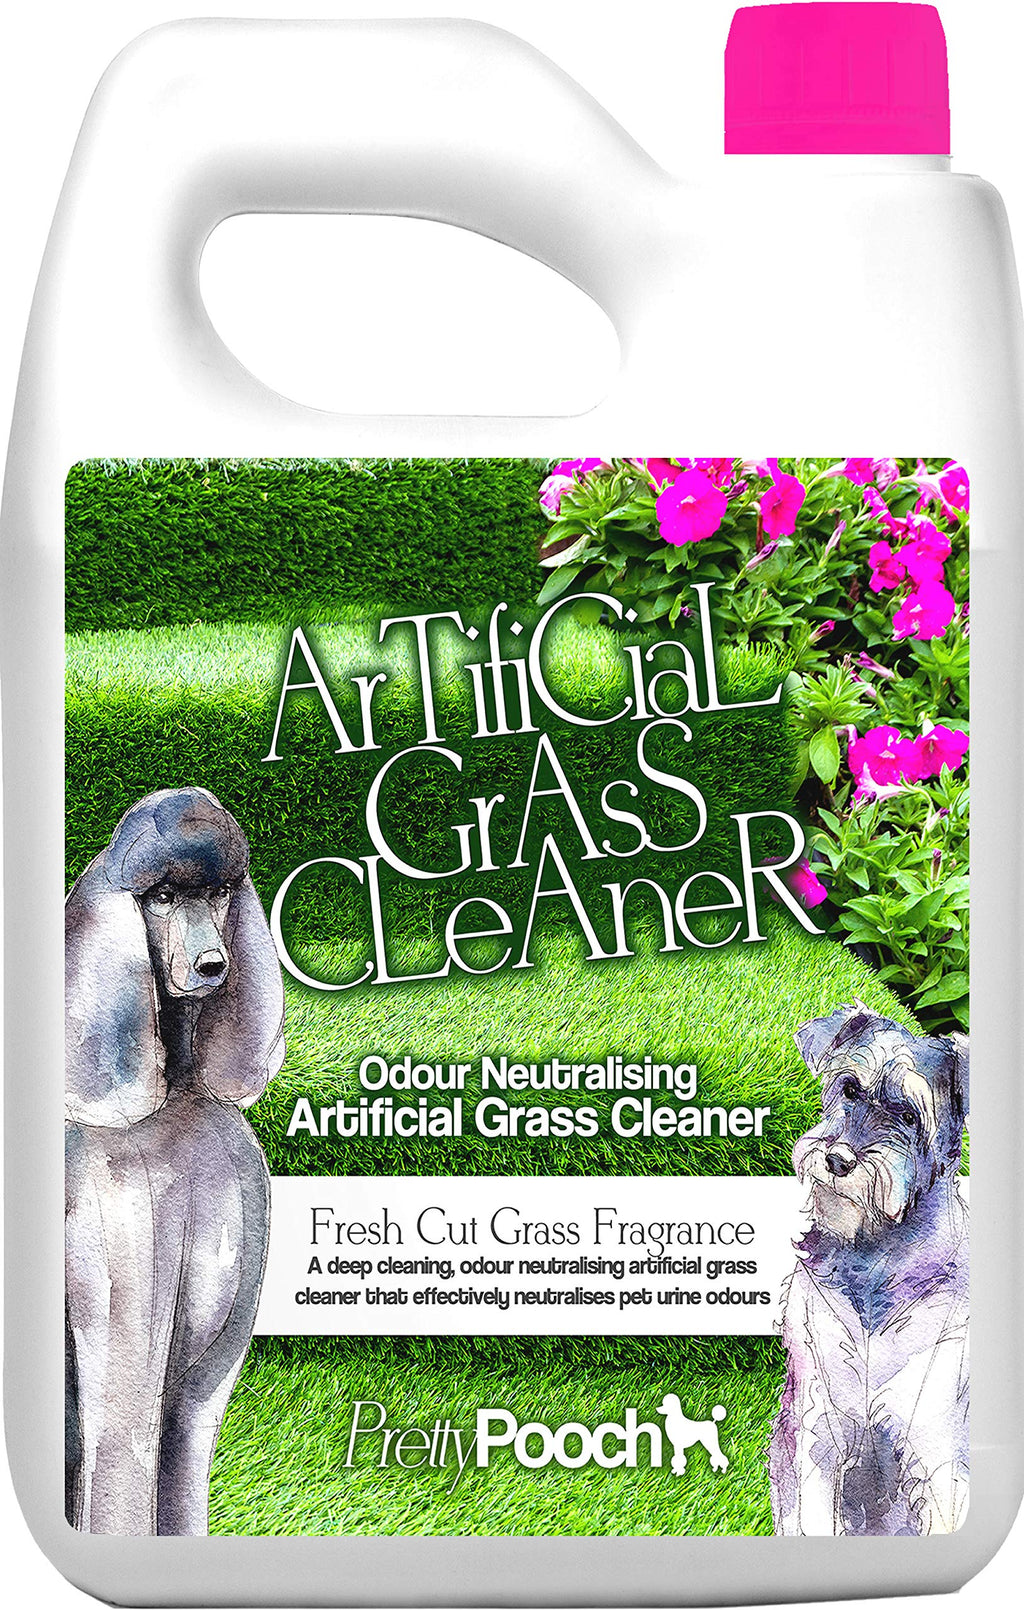 Pretty Pooch Artificial Grass Disinfectant Cleaner for Dogs (Fresh Cut Grass, 5 Litres) - Destroys Urine Odours & Deeply Cleans All Artificial Grass - Makes 15 Litres - Fresh Cut Grass Fragrance - PawsPlanet Australia